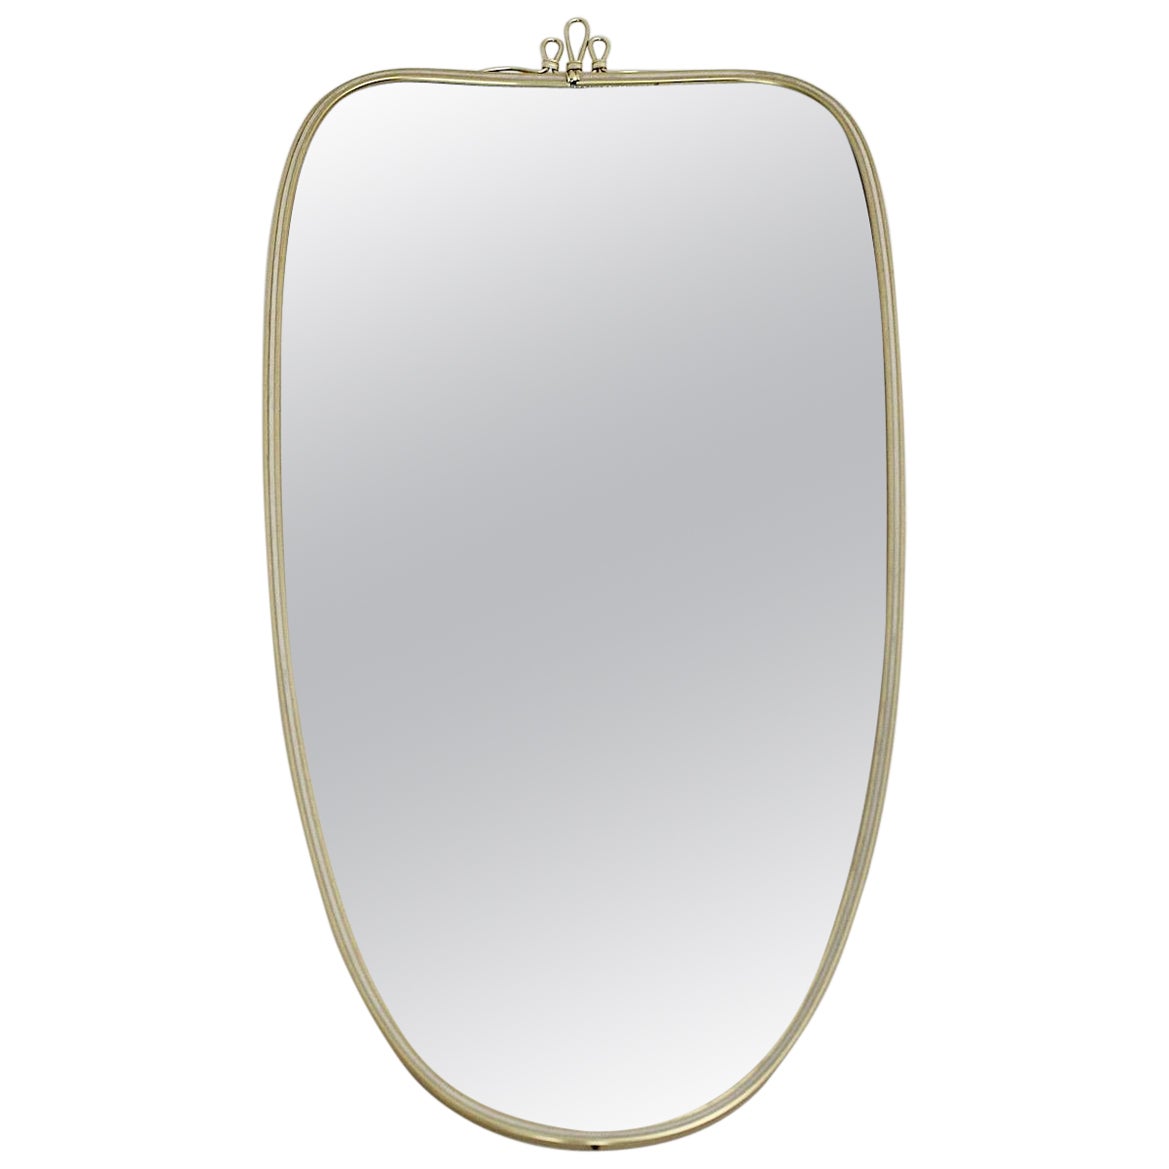 Modernist Vintage Oval Golden Metal Wall Mirror 1950s Italy For Sale